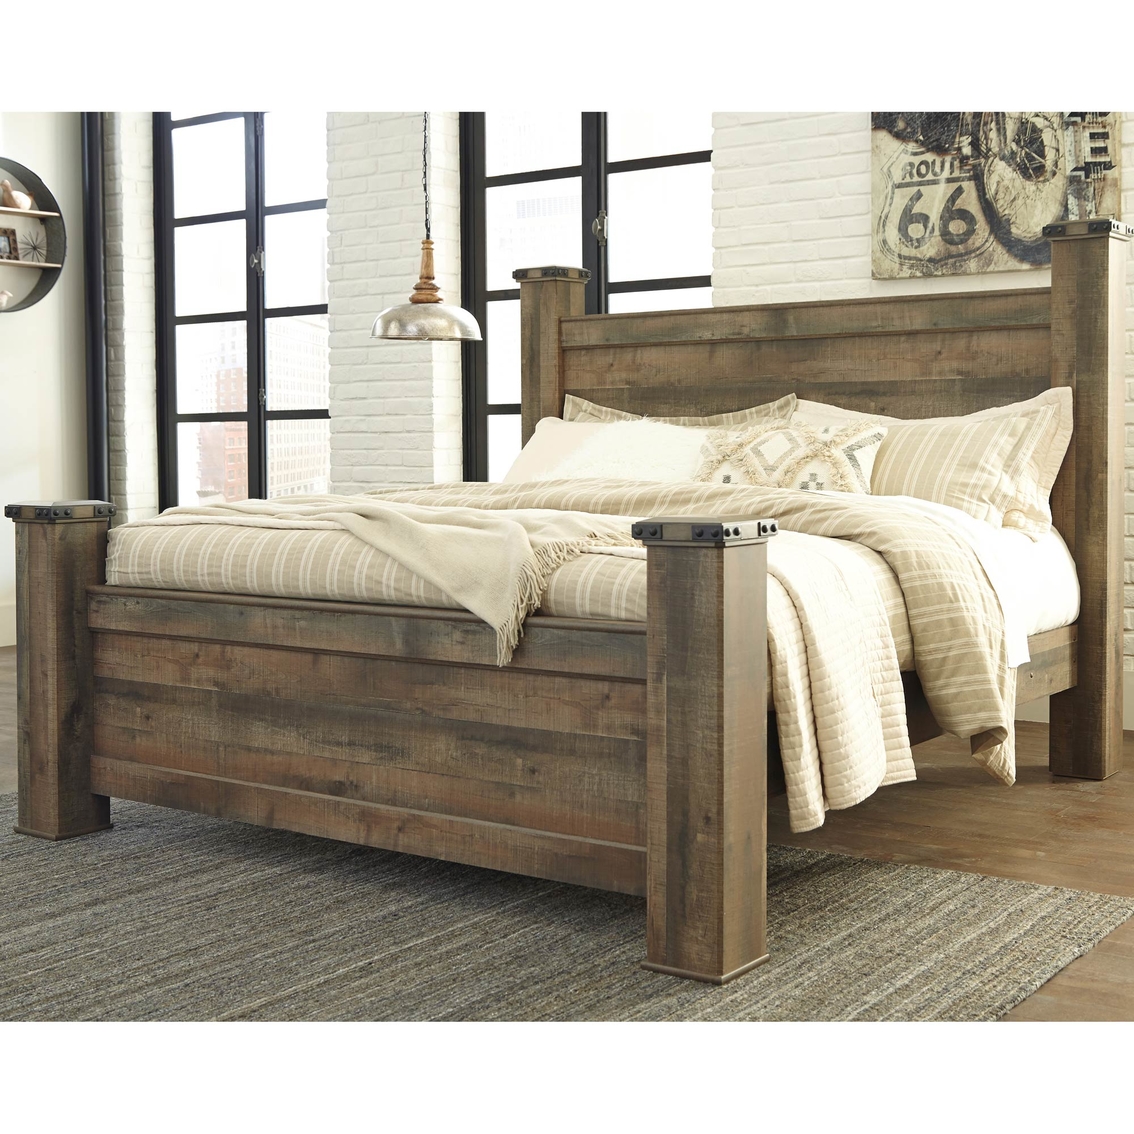 Signature Design by Ashley Trinell Poster Bed - Image 4 of 4